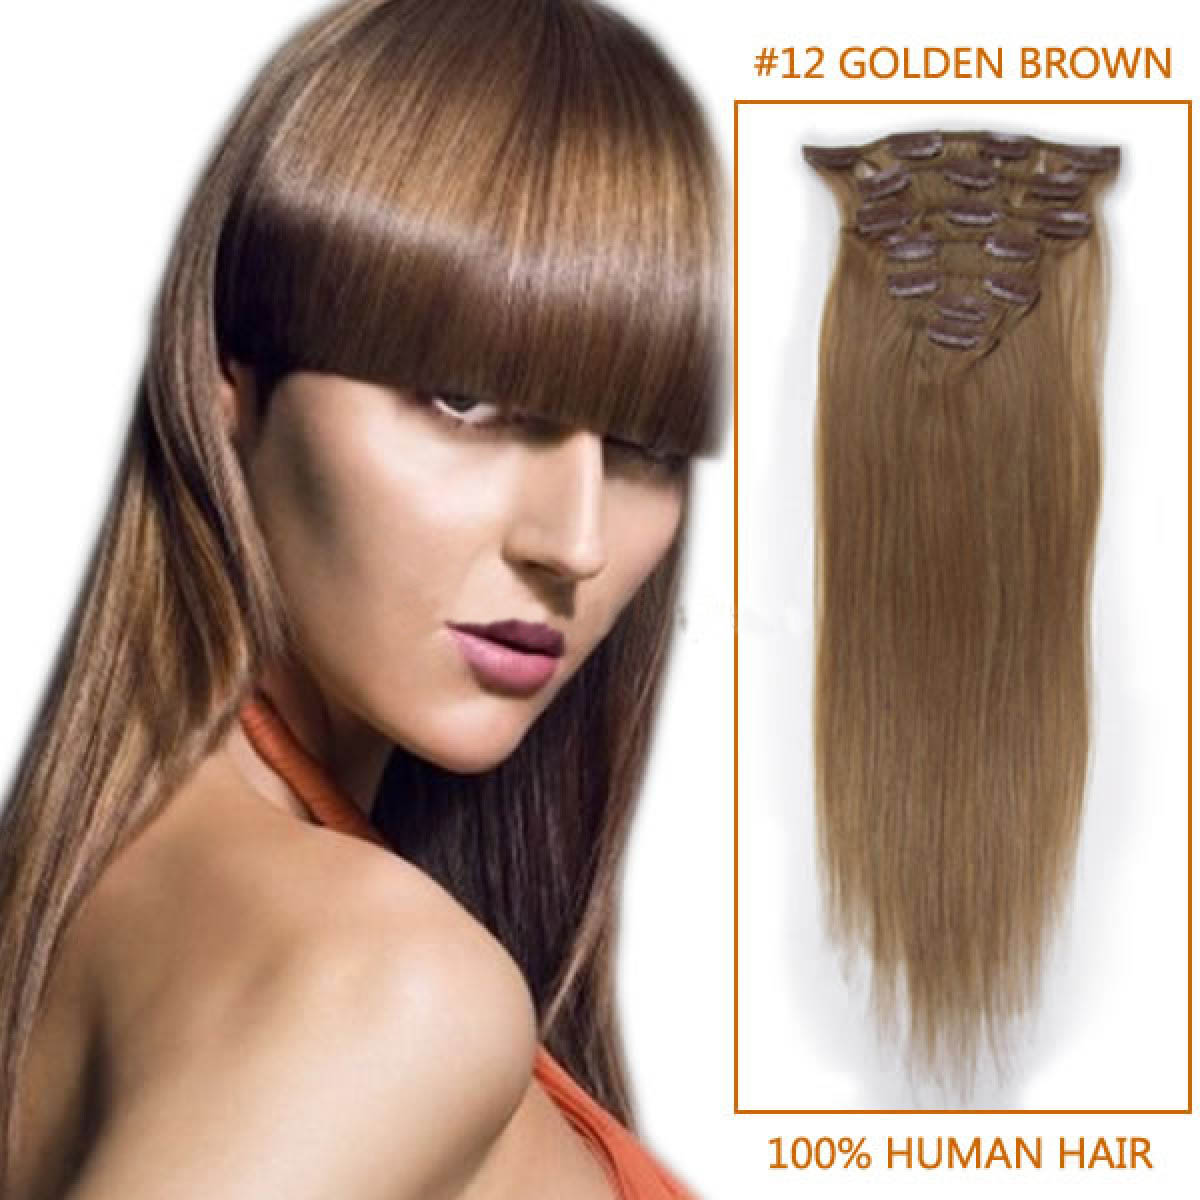 Inch 12 Golden Brown Clip In Human Hair Extensions 8pcs